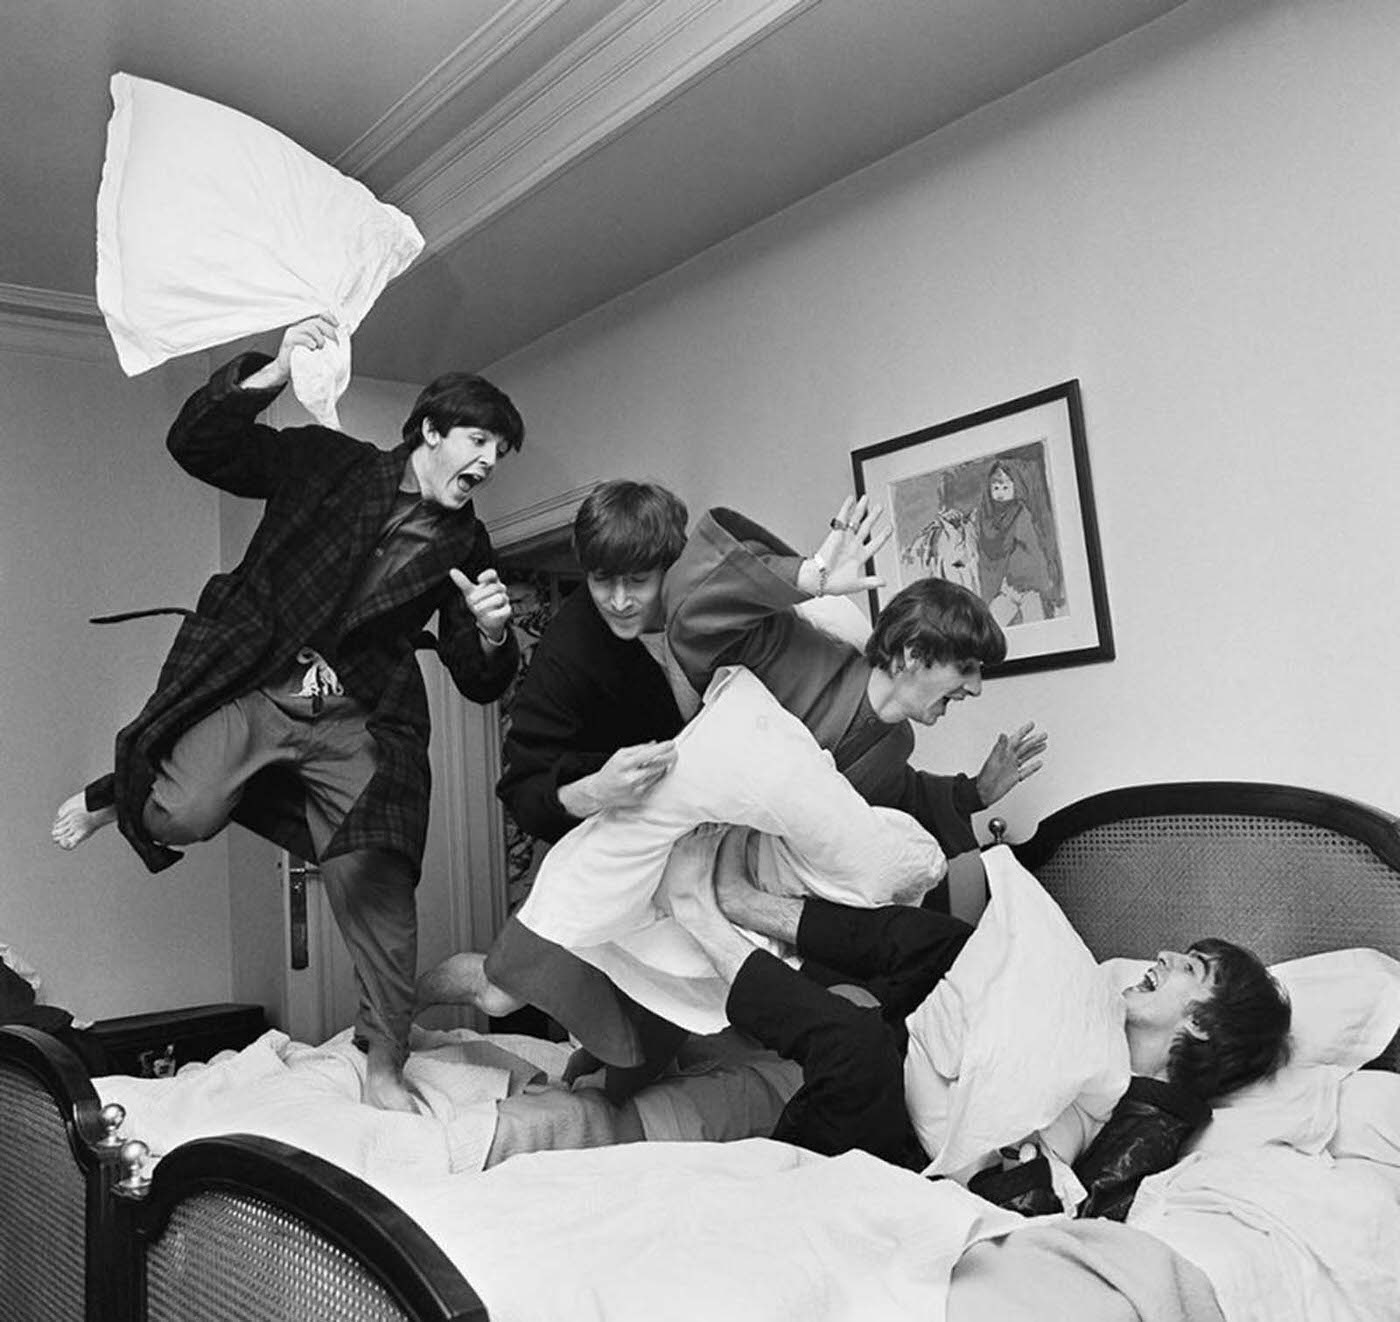 The Pillow Fight, 1964